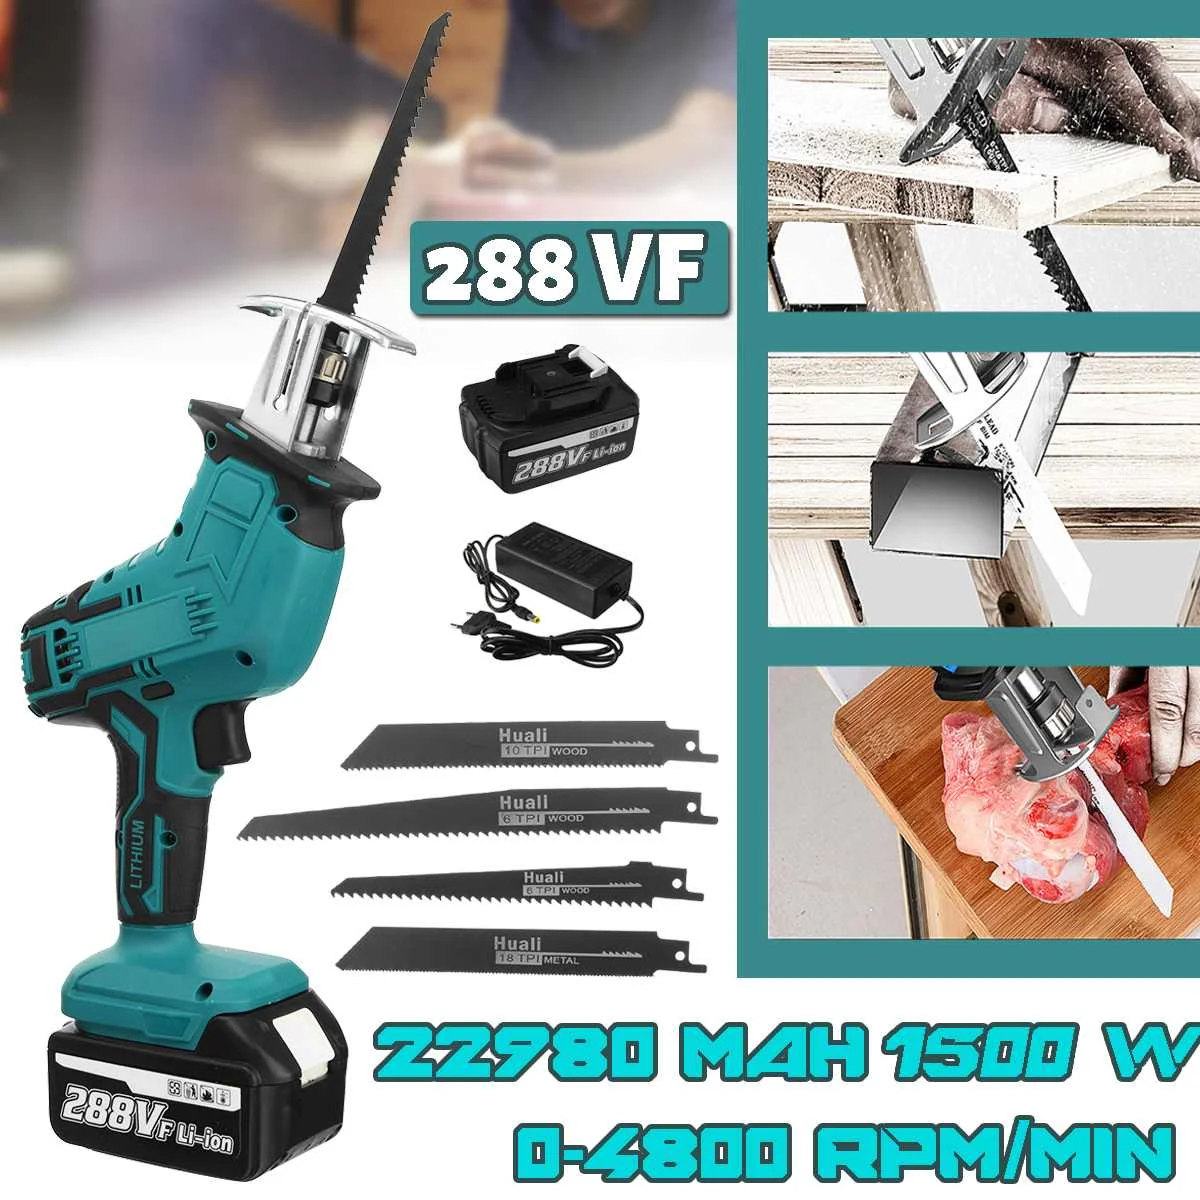 

NEW 288VF Cordless Reciprocating Saw With 4 Saw Blades Metal Cutting Wood Tool Portable Woodworking Cutters with 1/2 Batterys